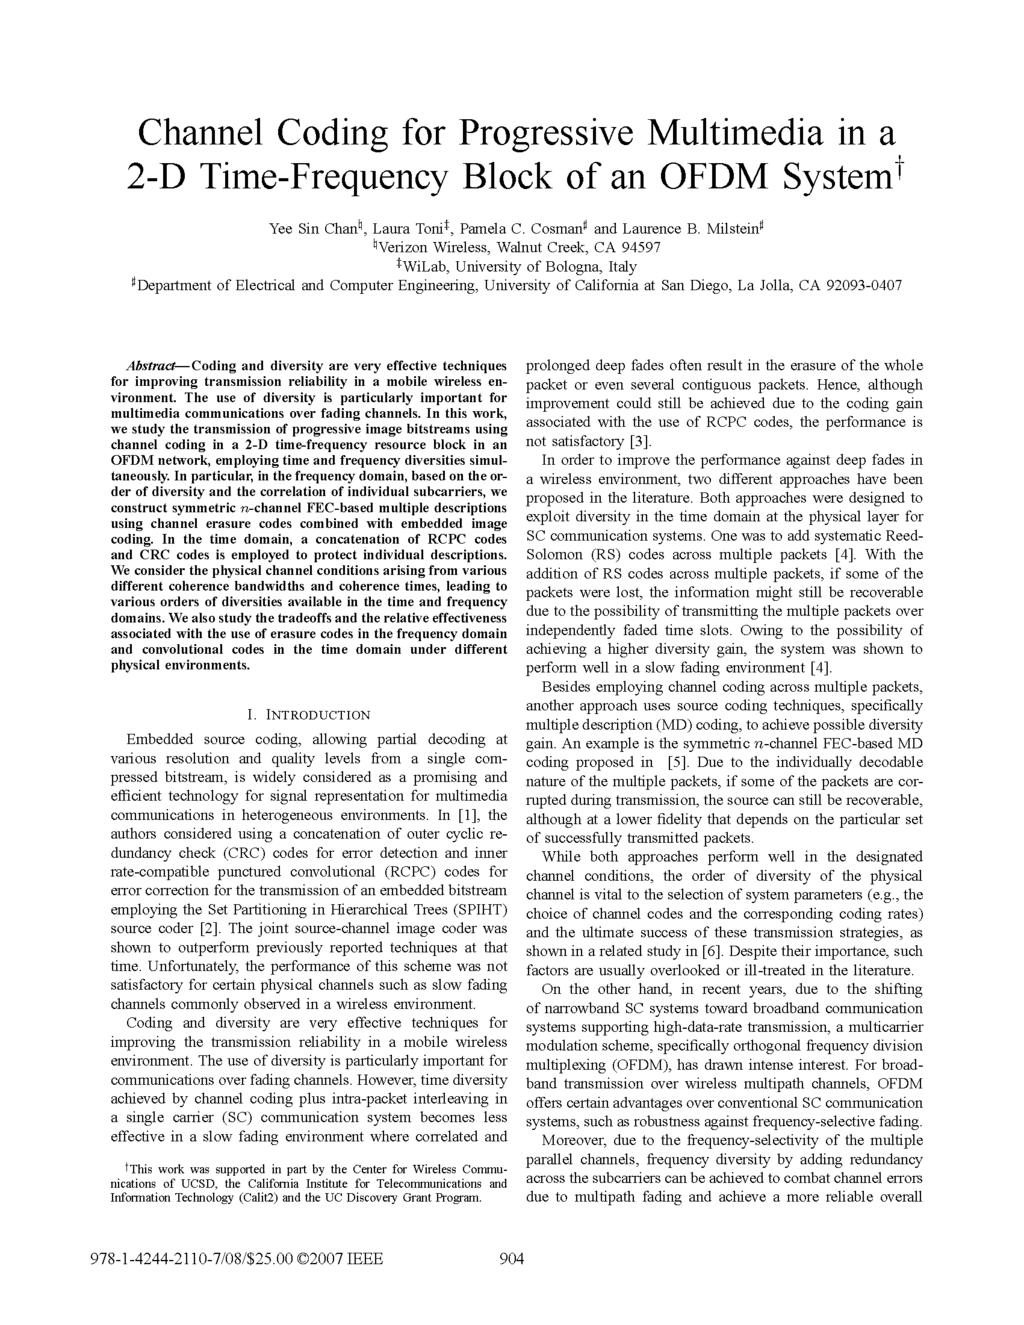 Channel Coding for Progressive Multimedia in a 2-D Time-Frequency Block of an OFDM Systemt Yee Sin ChanK, Laura Tonit, Pamela C. Cosman: and Laurence B.